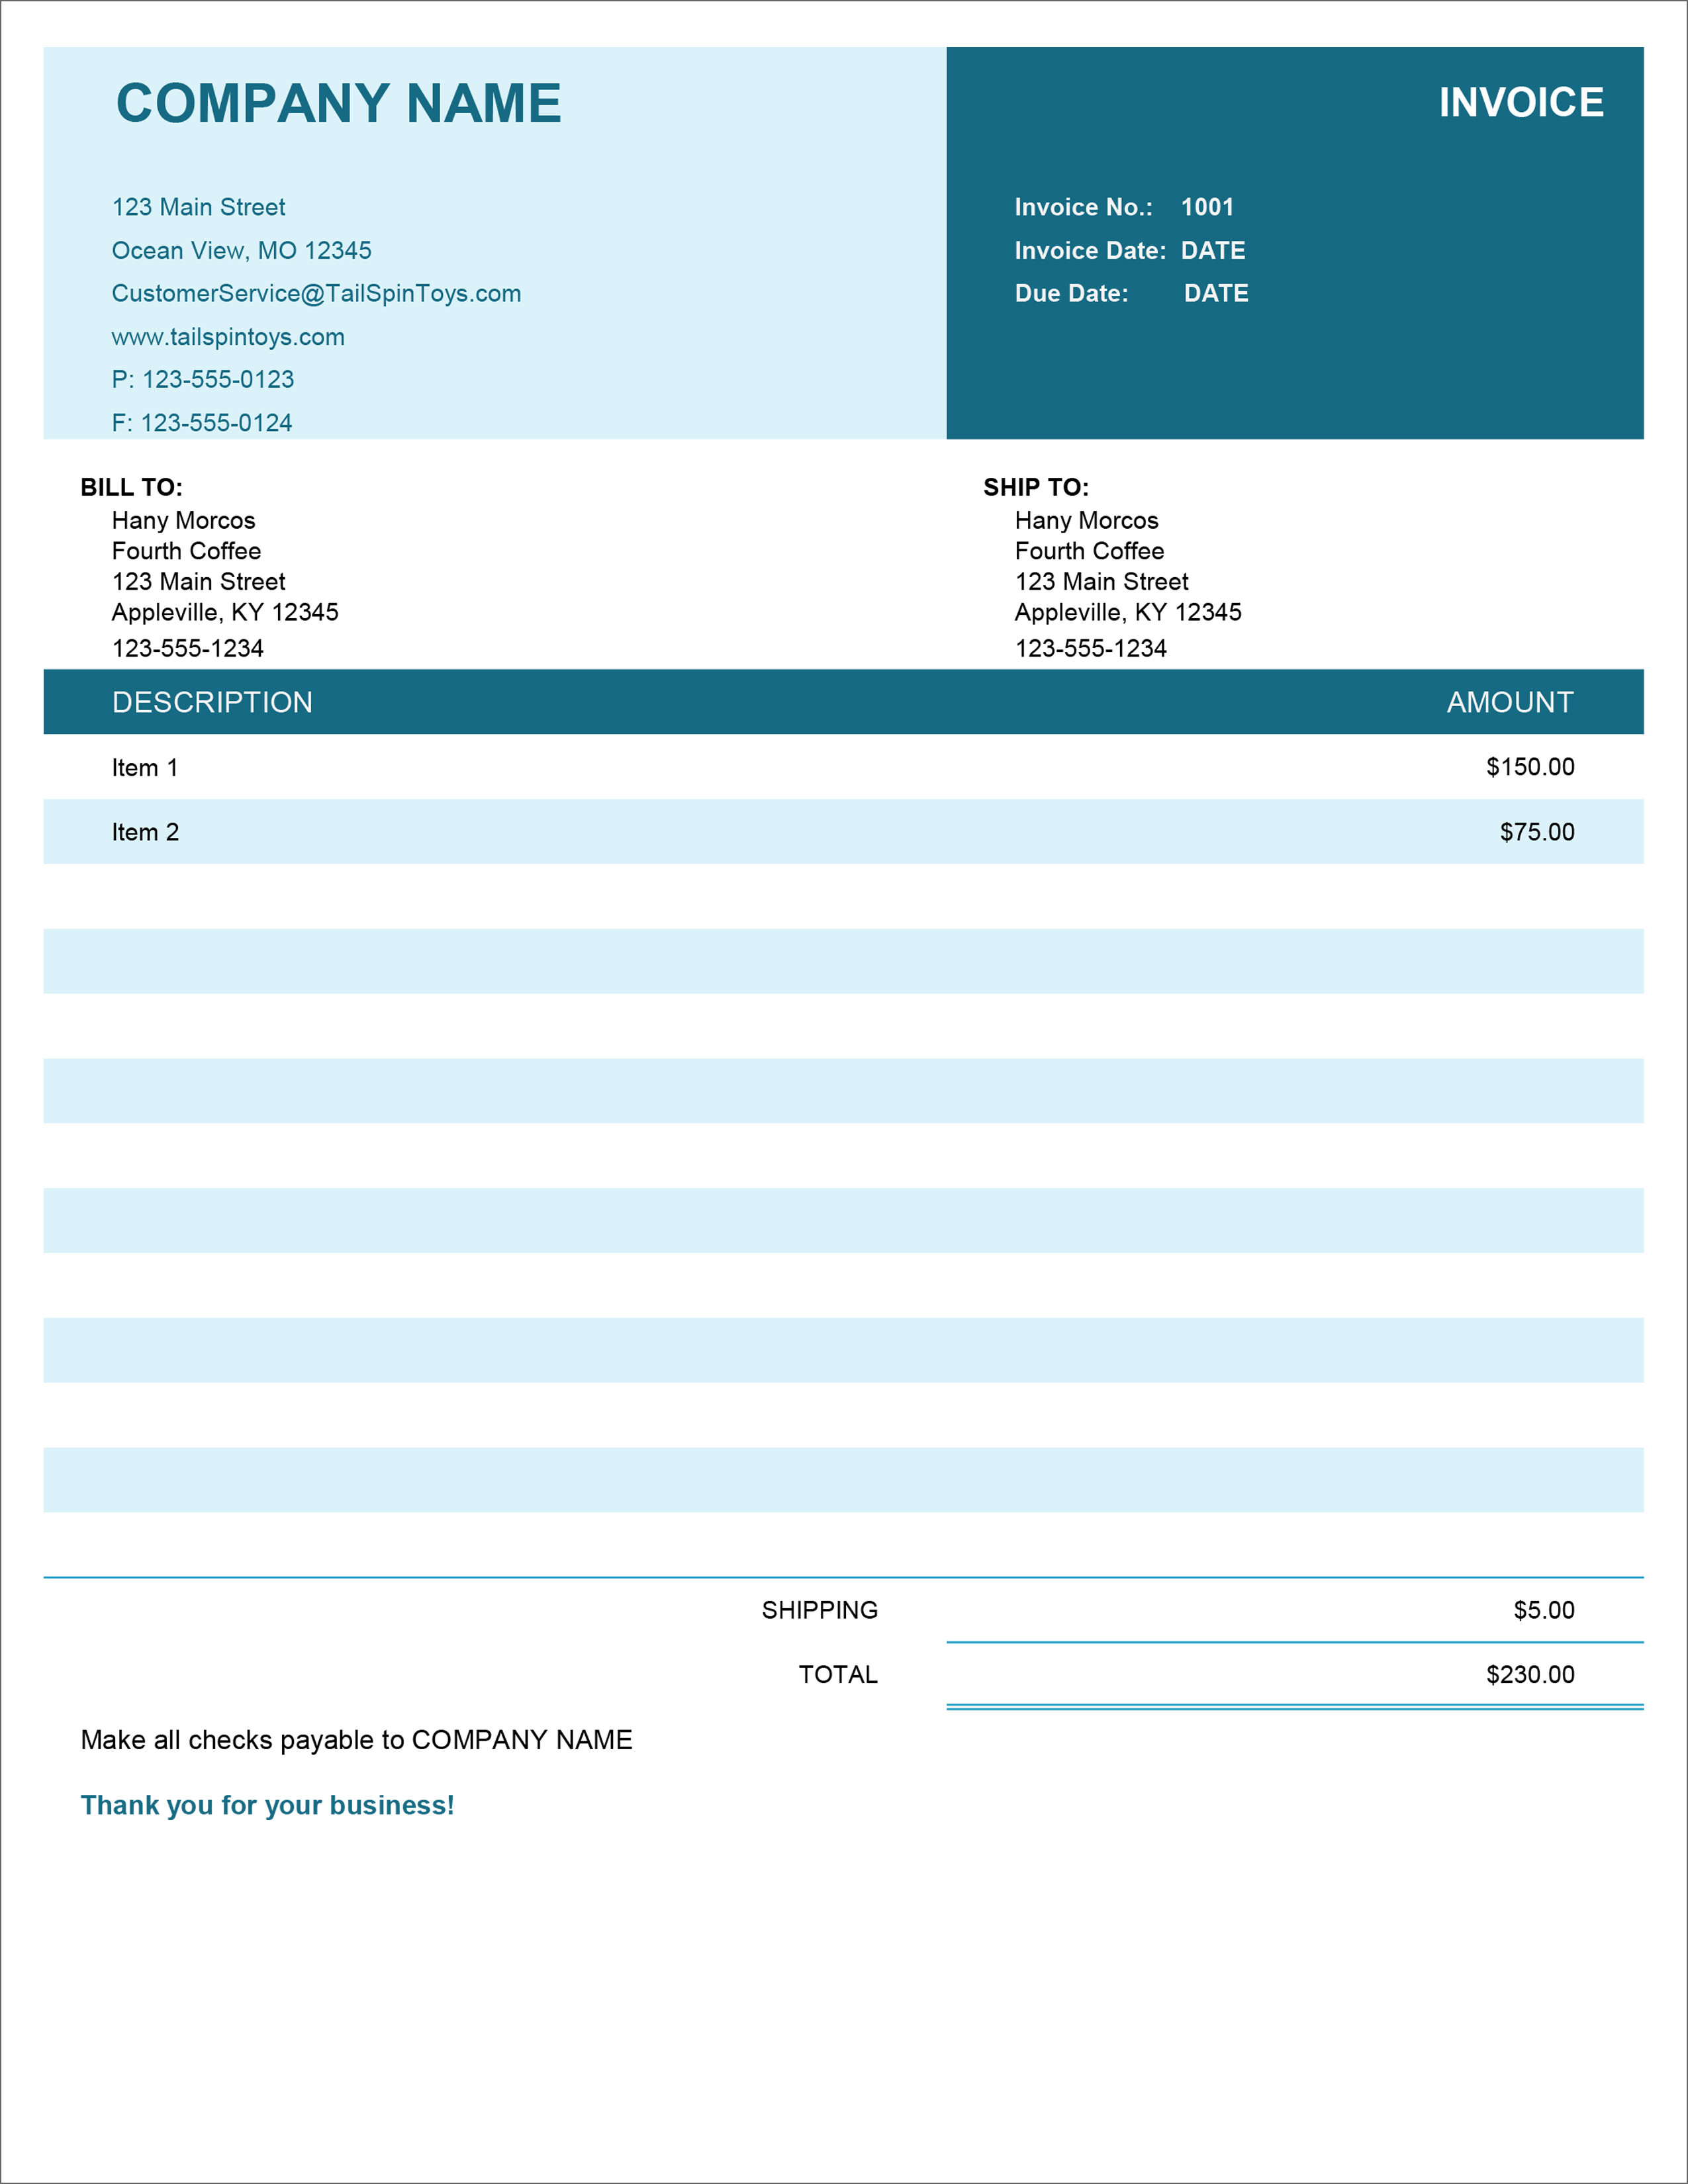 View It Invoice Template Excel Images